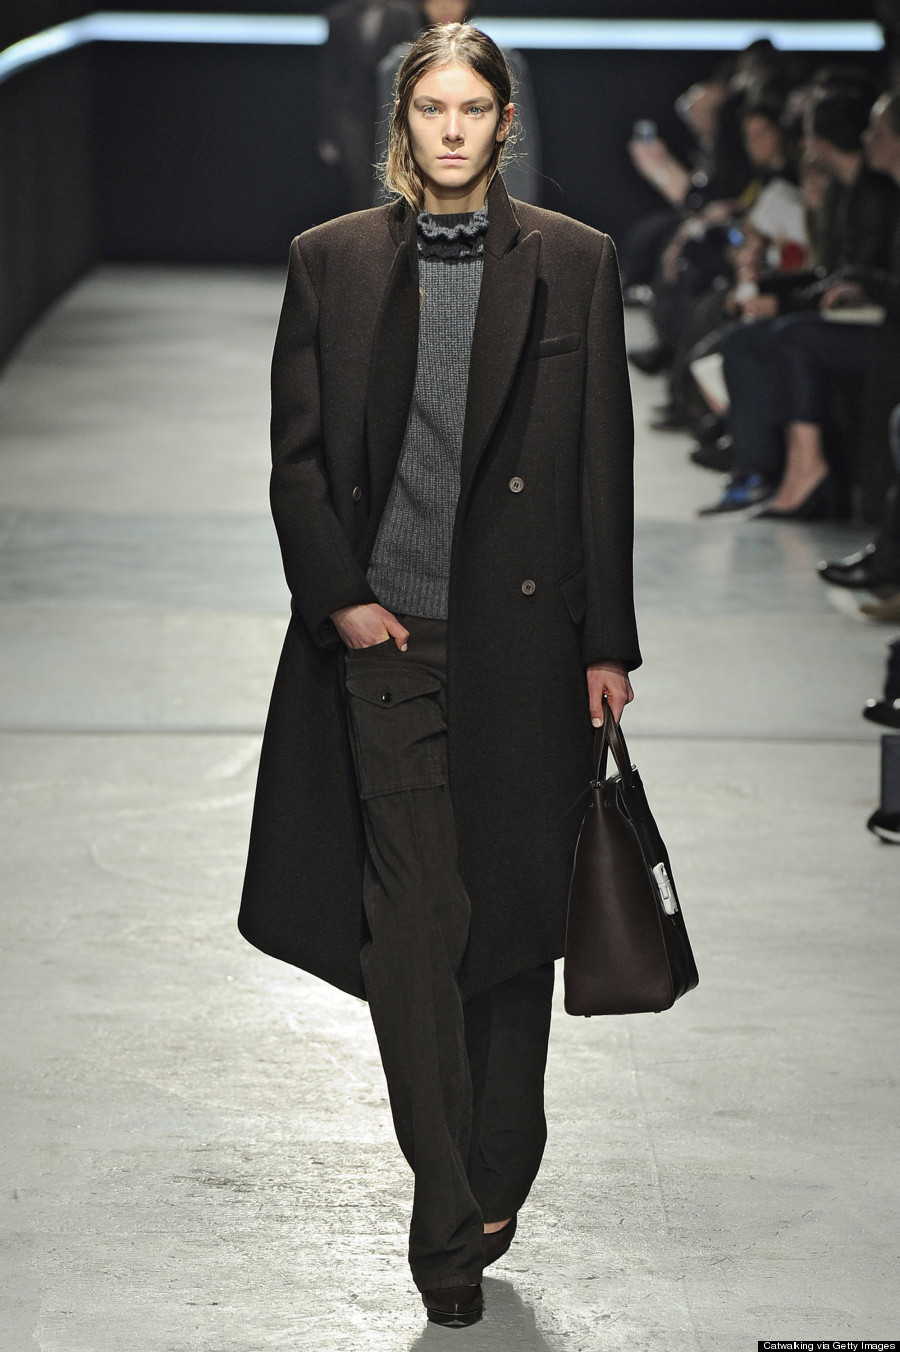 Fall 2014 Fashion Trends: 10 Key Looks You Need Now (PHOTOS) | HuffPost ...